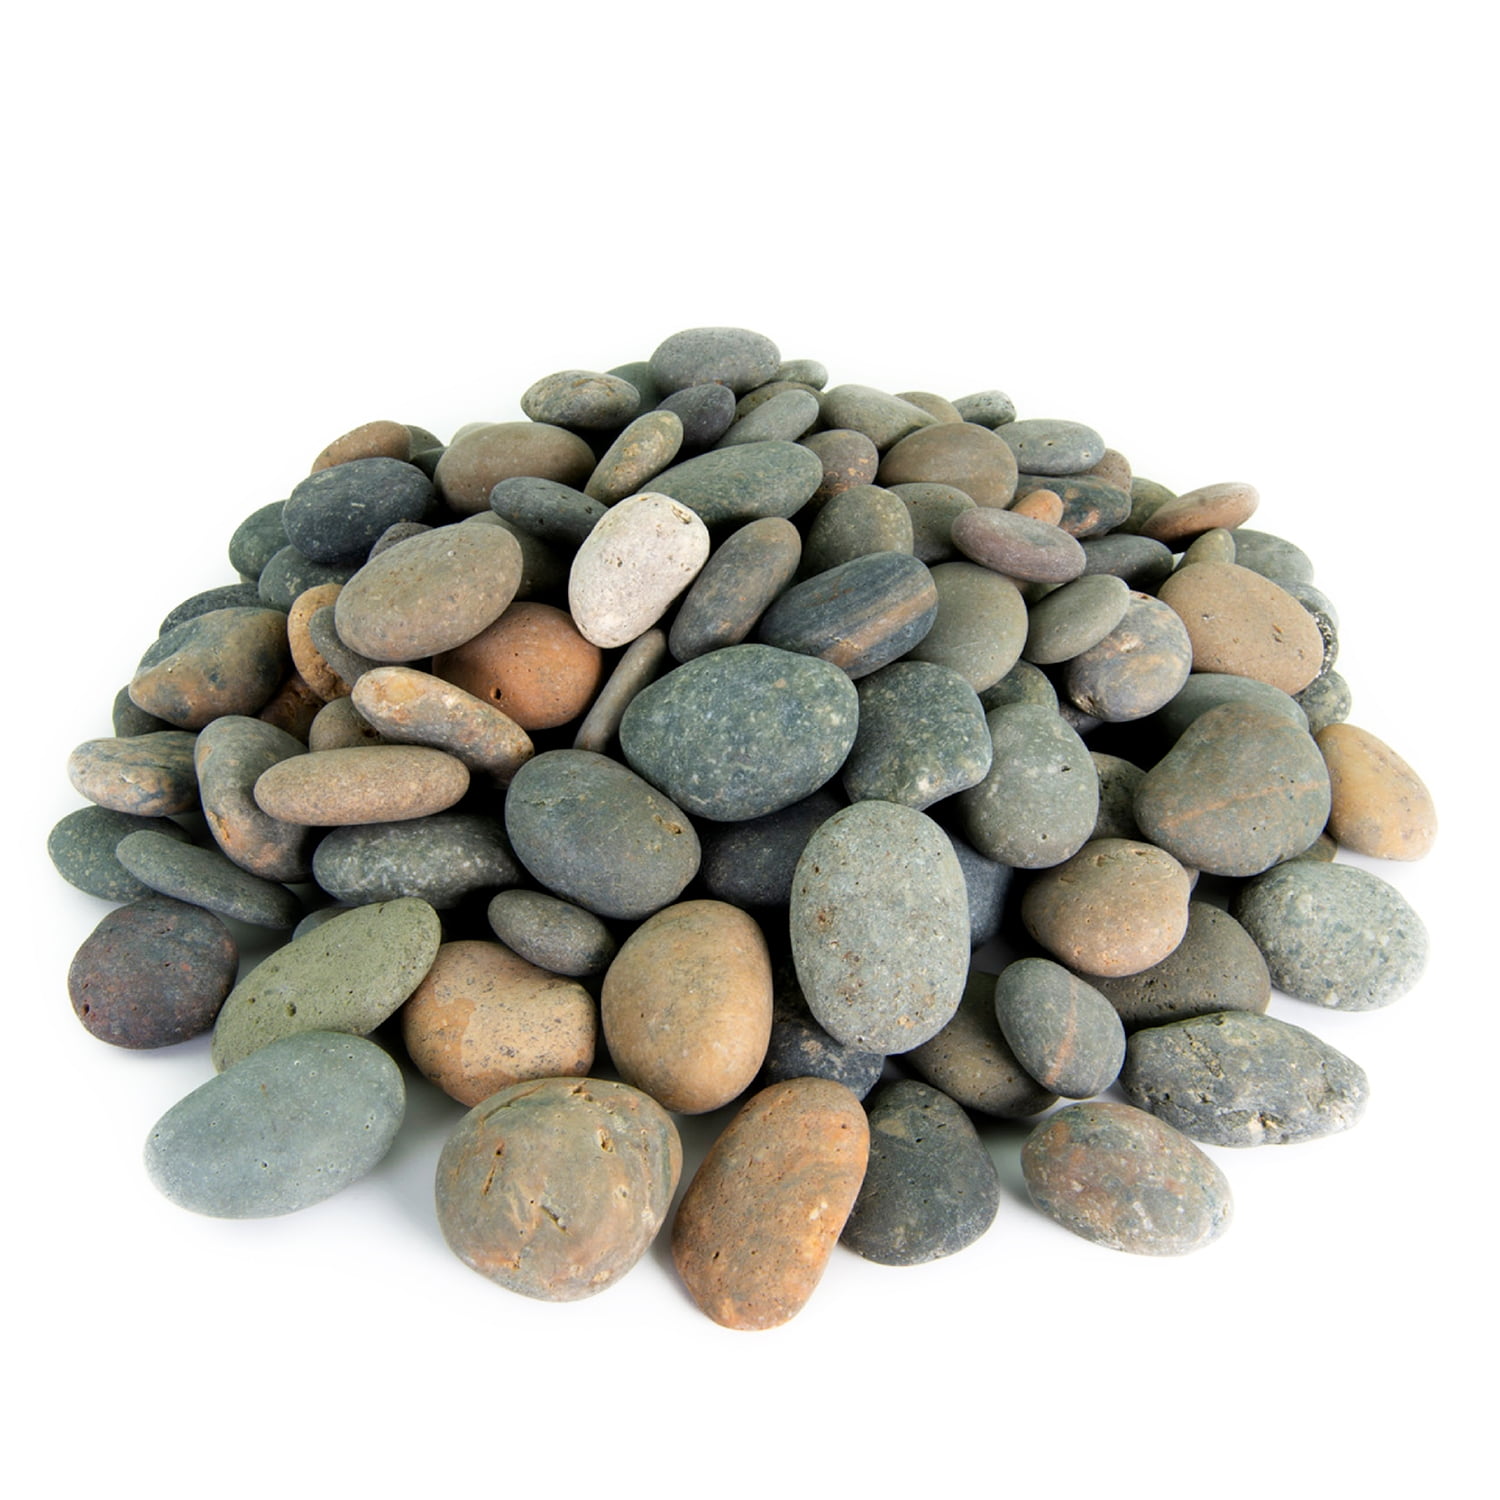 Mexican Beach Pebbles Round River Rock, How Many Pounds Of Landscape Rock Do I Need